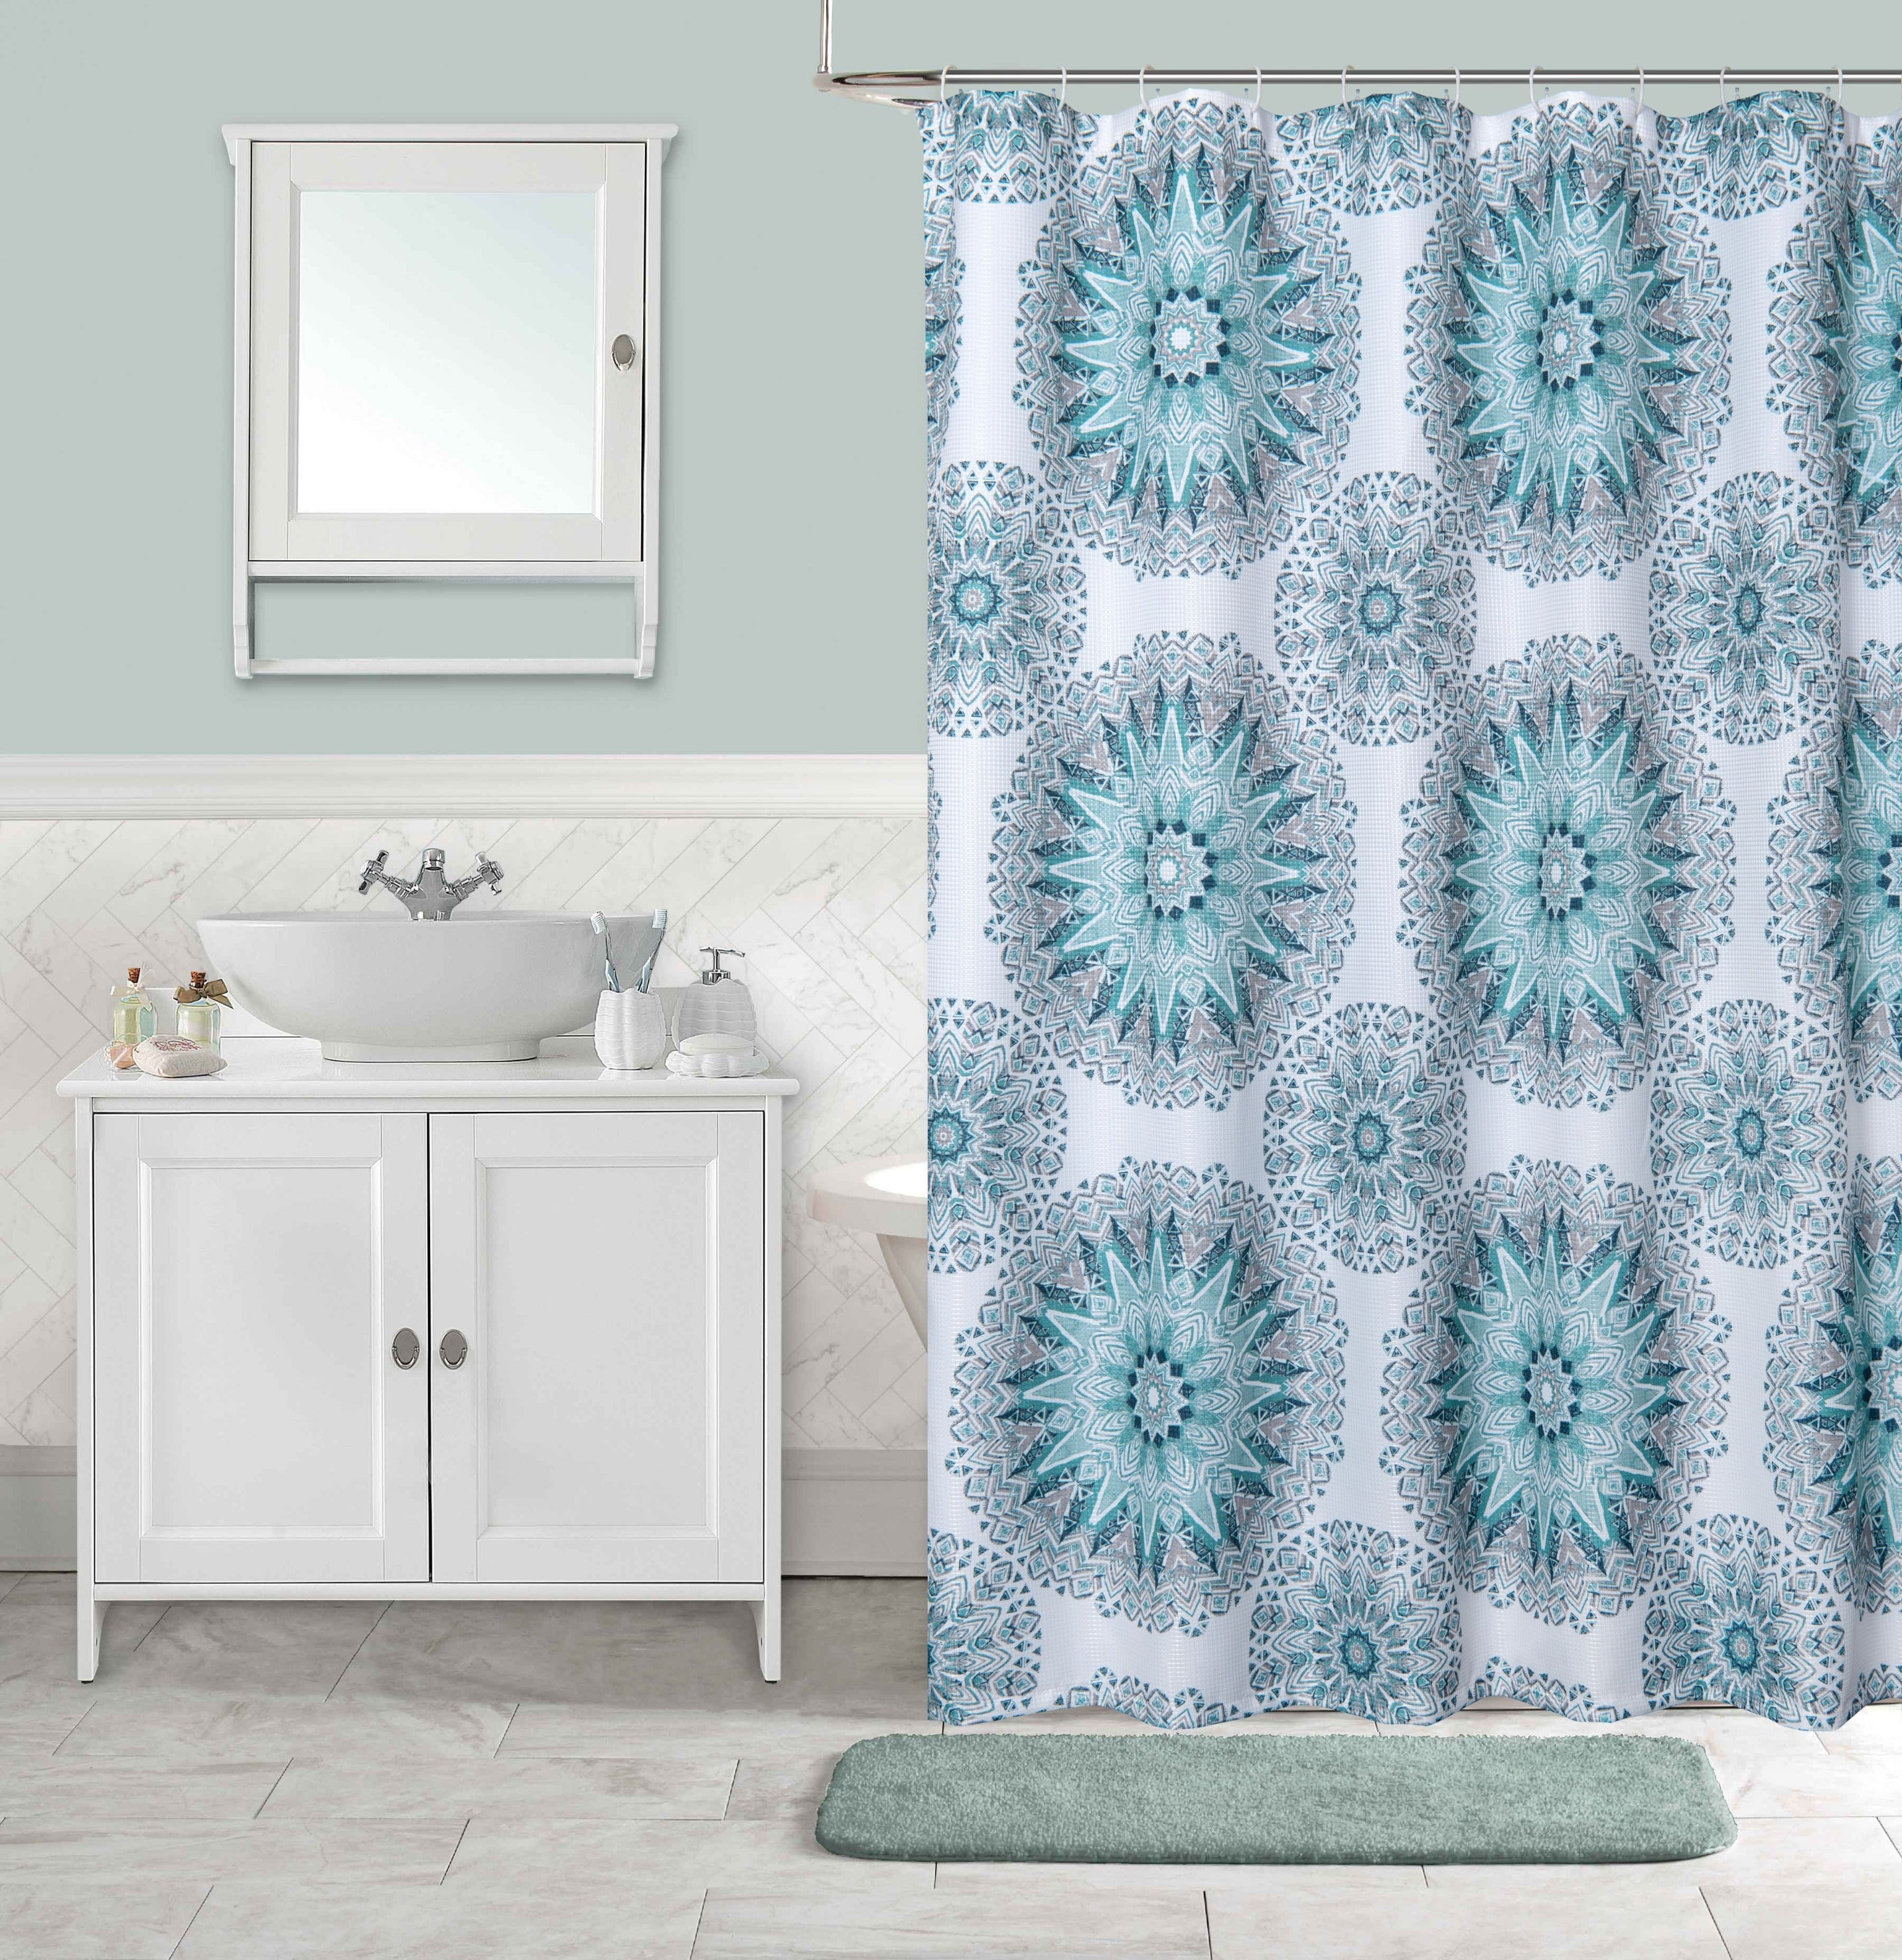 Dainty Home Printed Waffle 3D Textured Waffle Weave Textured Kaleidoscope Designed Fabric Shower Curtain